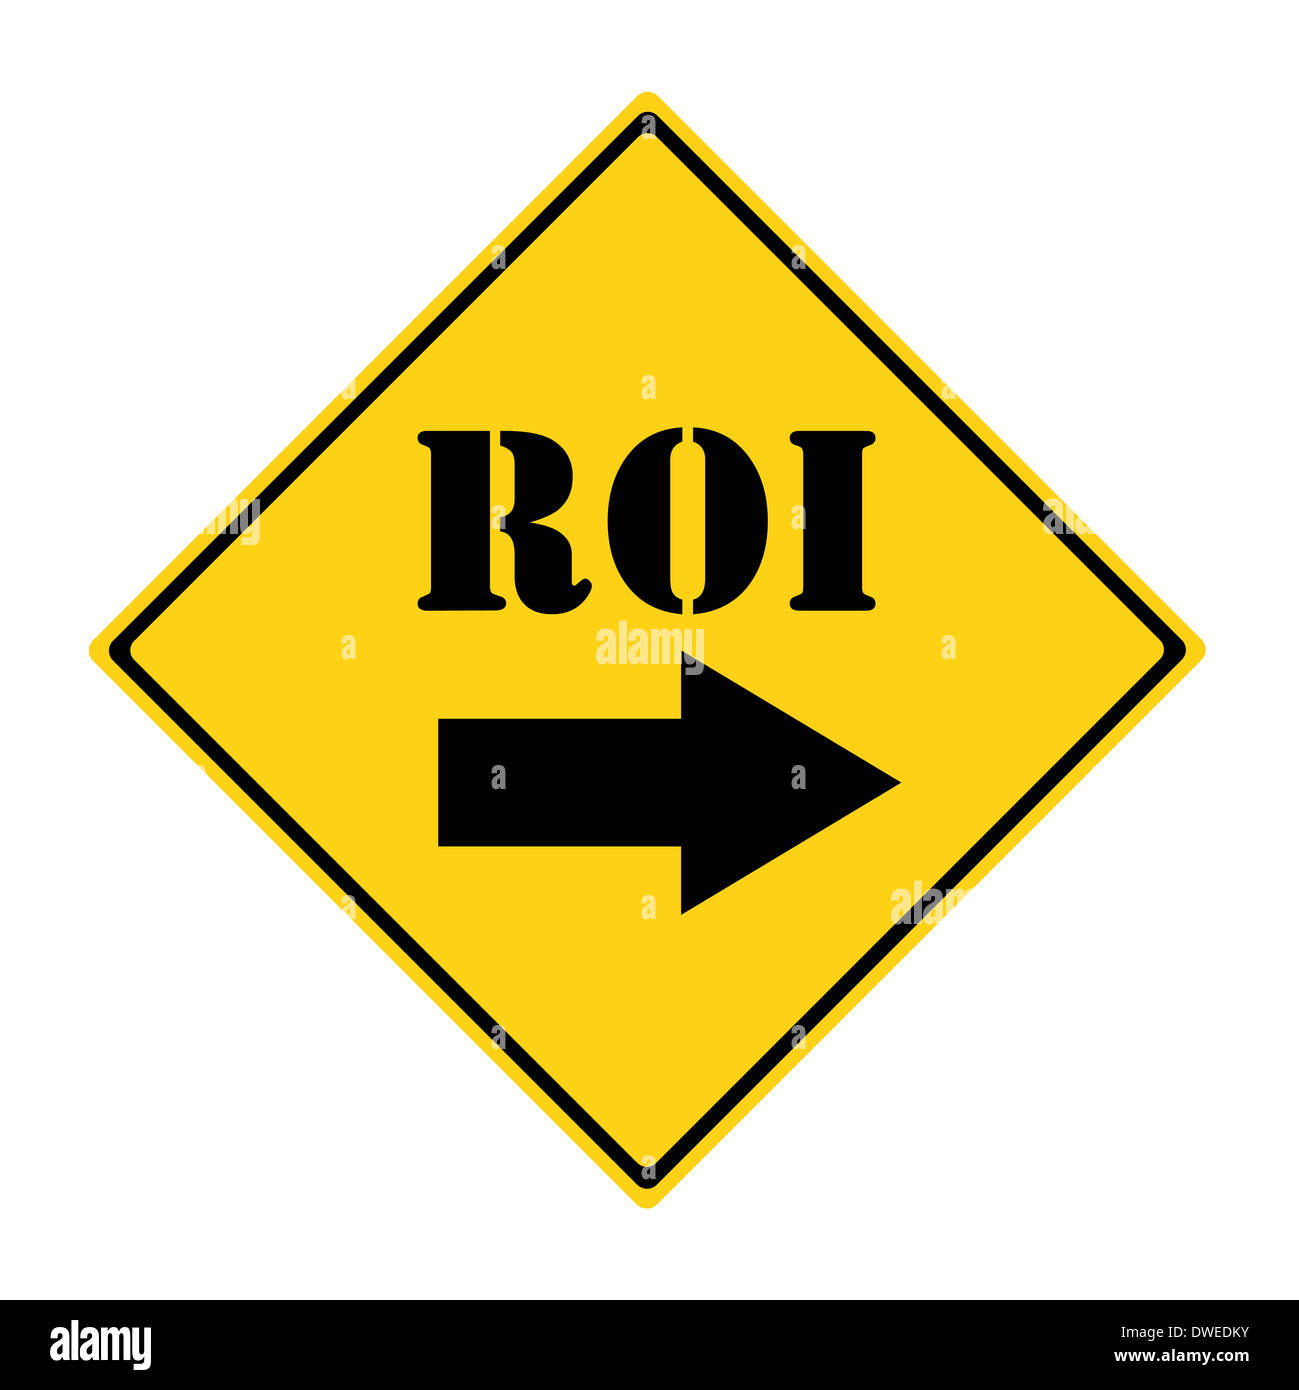 A yellow and black diamond shaped road sign with the word ROI and an arrow pointing the way making a great concept. Stock Photo